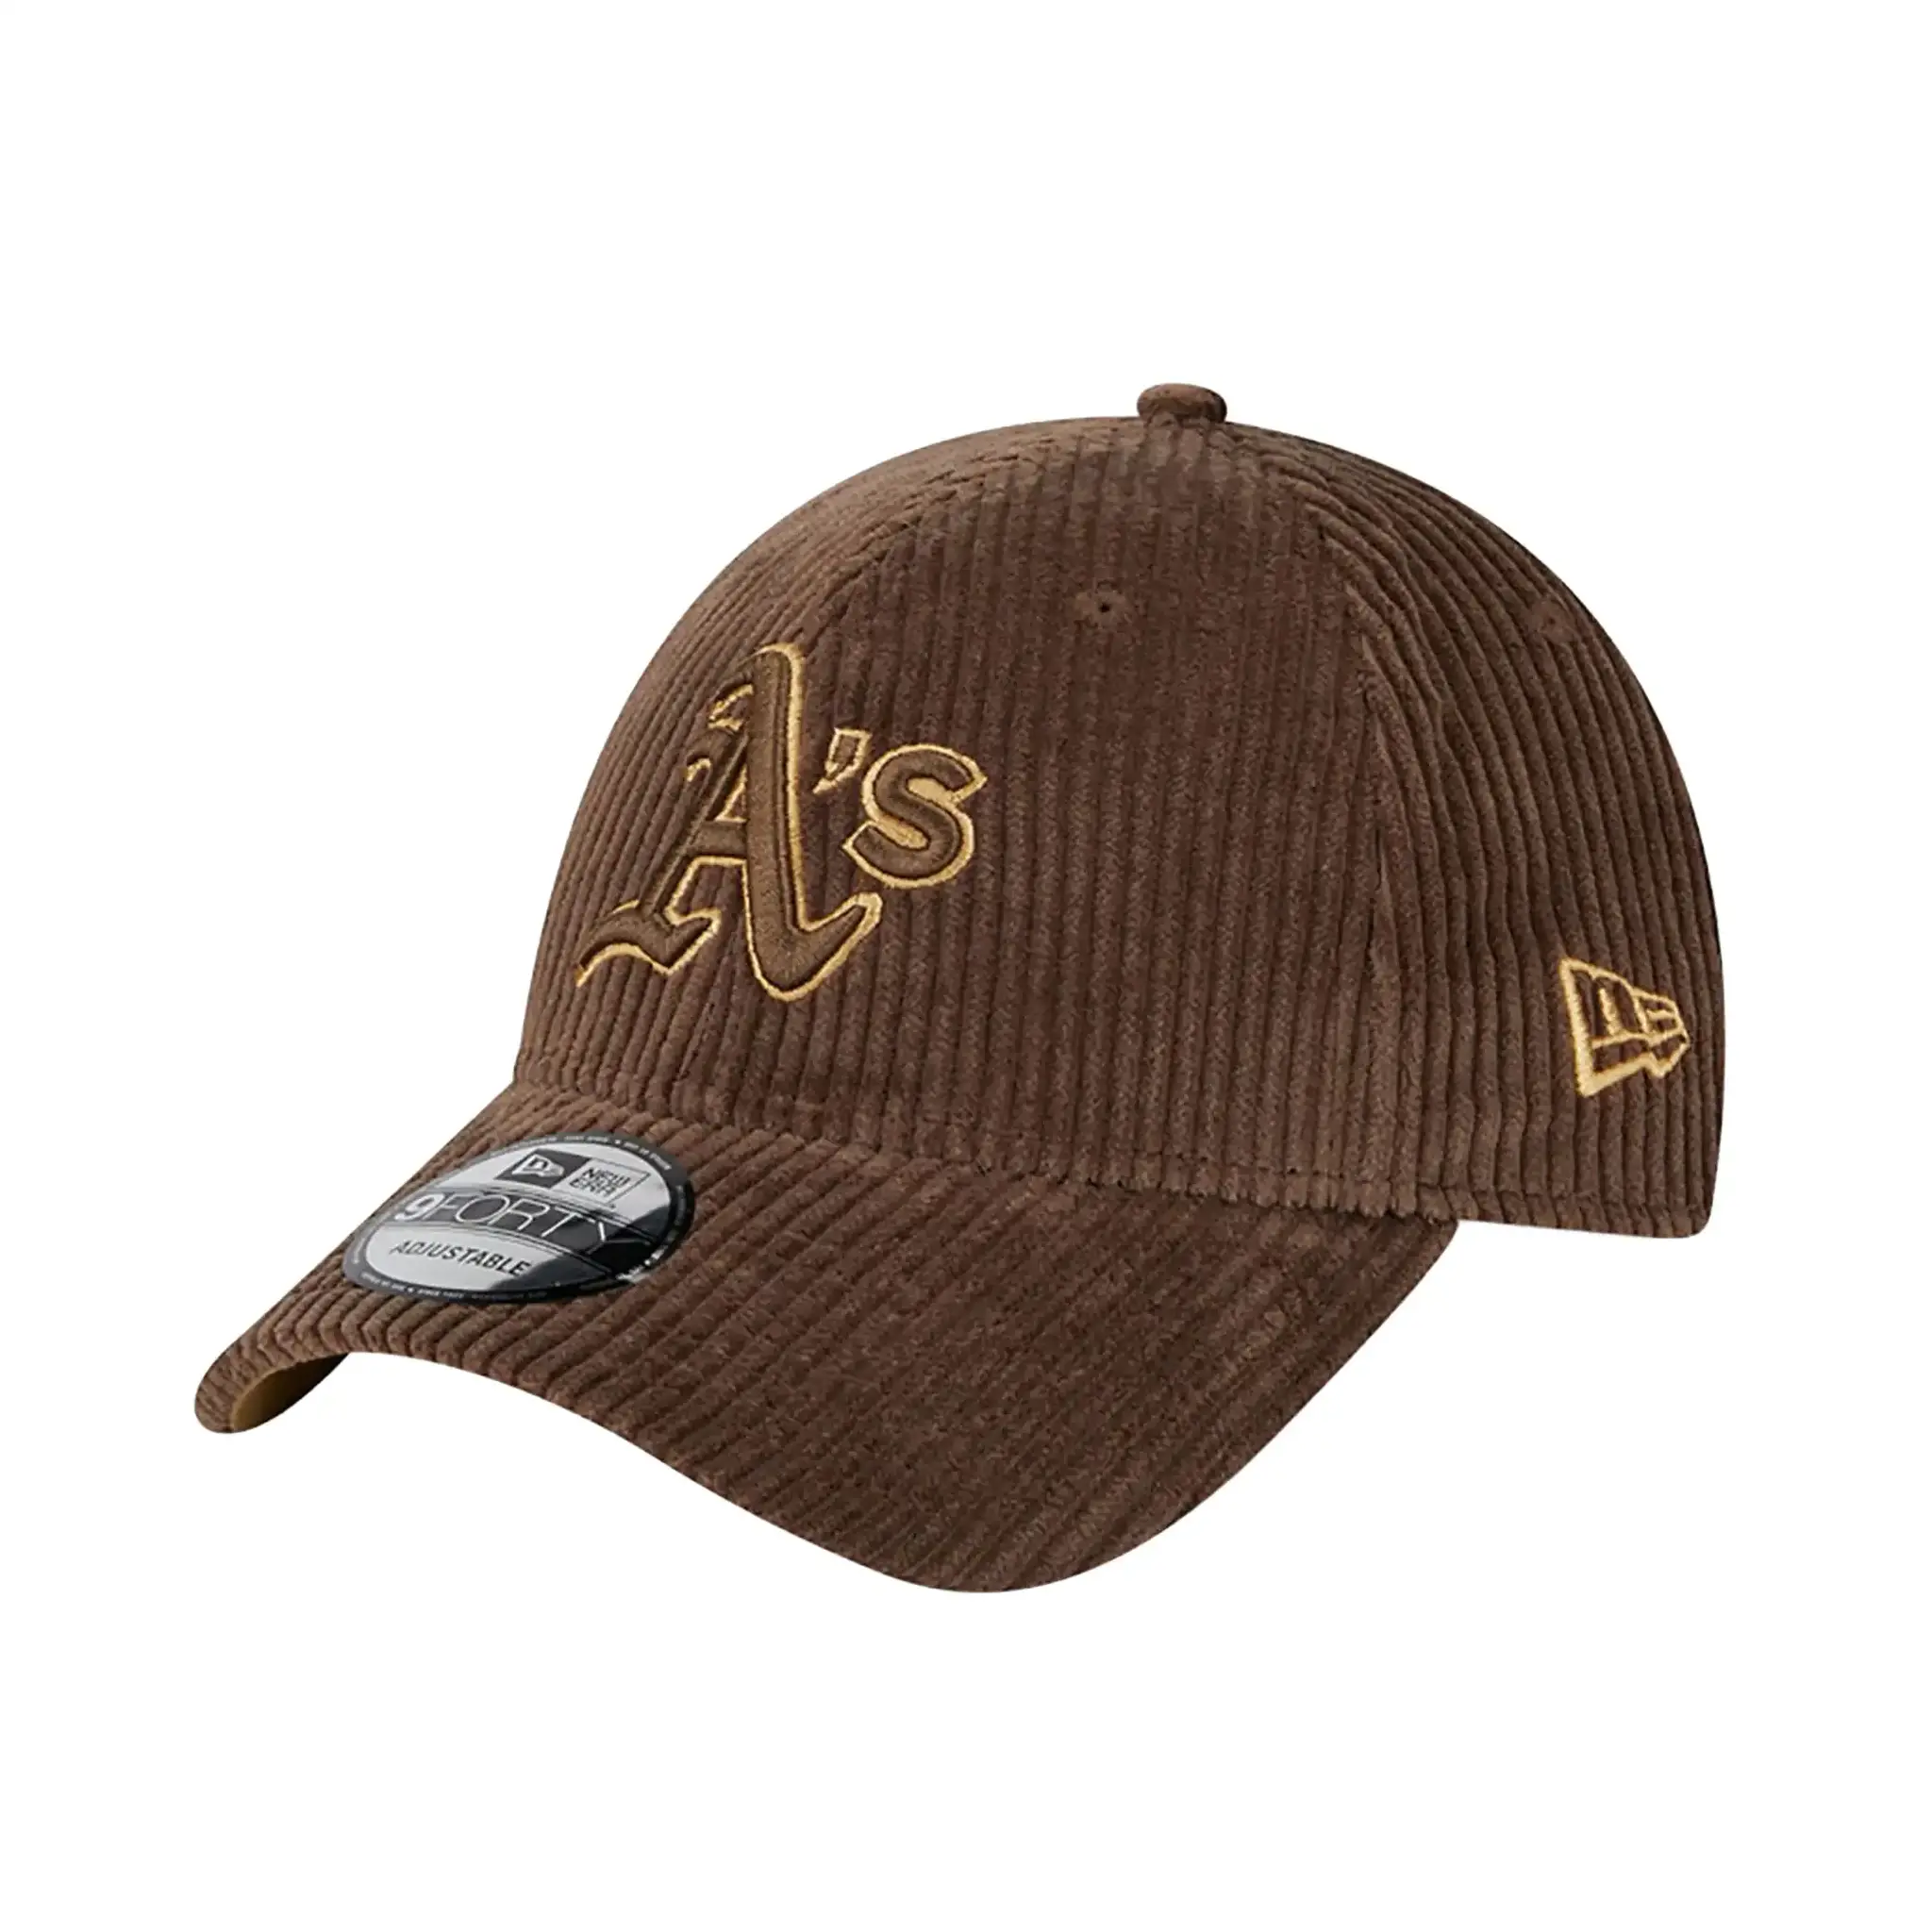 New Era - Oakland Athletics Wide Cord Brown 9FORTY Adjustable Cap